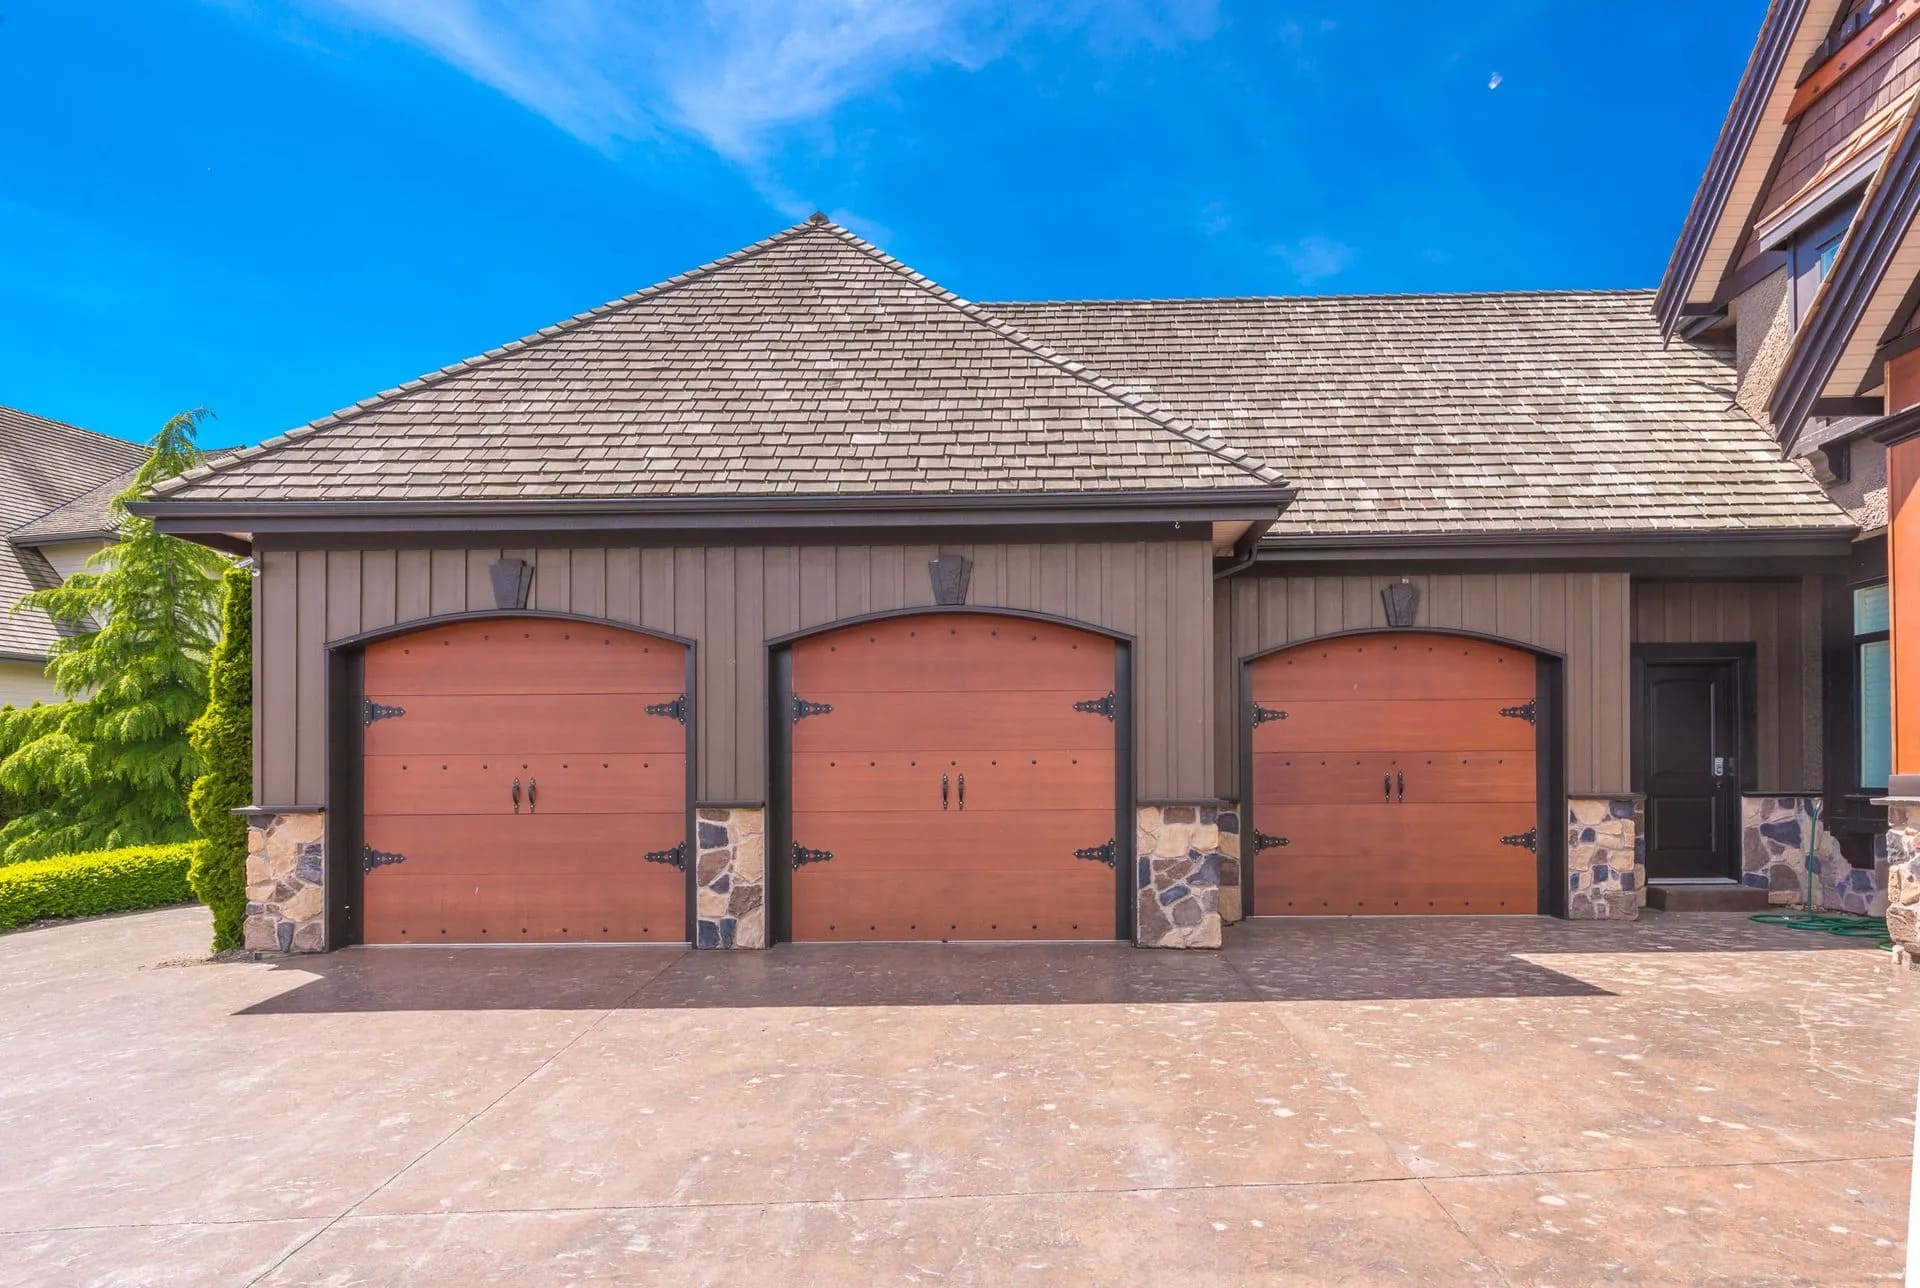 3 Reasons to Install Perimeter Security With Your Garage Doors